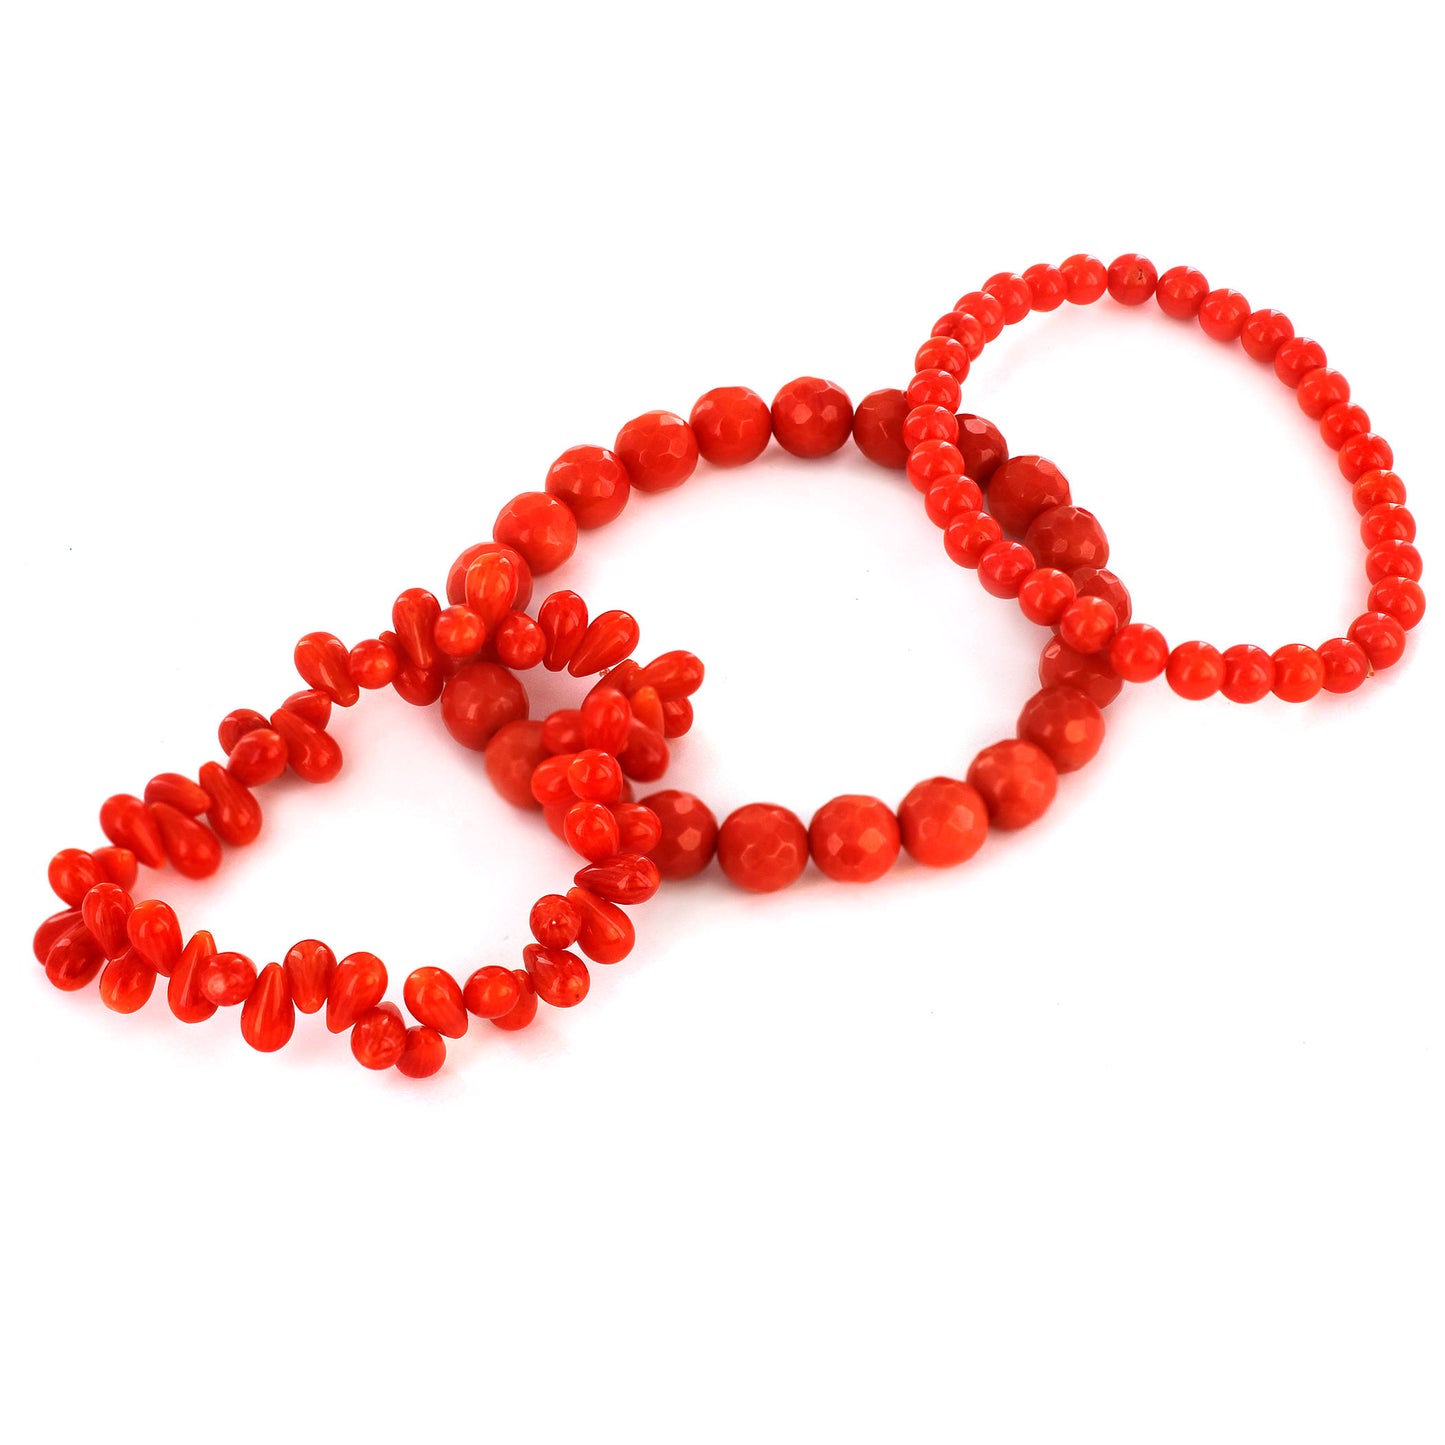 Women's Dyed Orange Coral Beaded and Multi-faceted Bracelets (Set of 3)